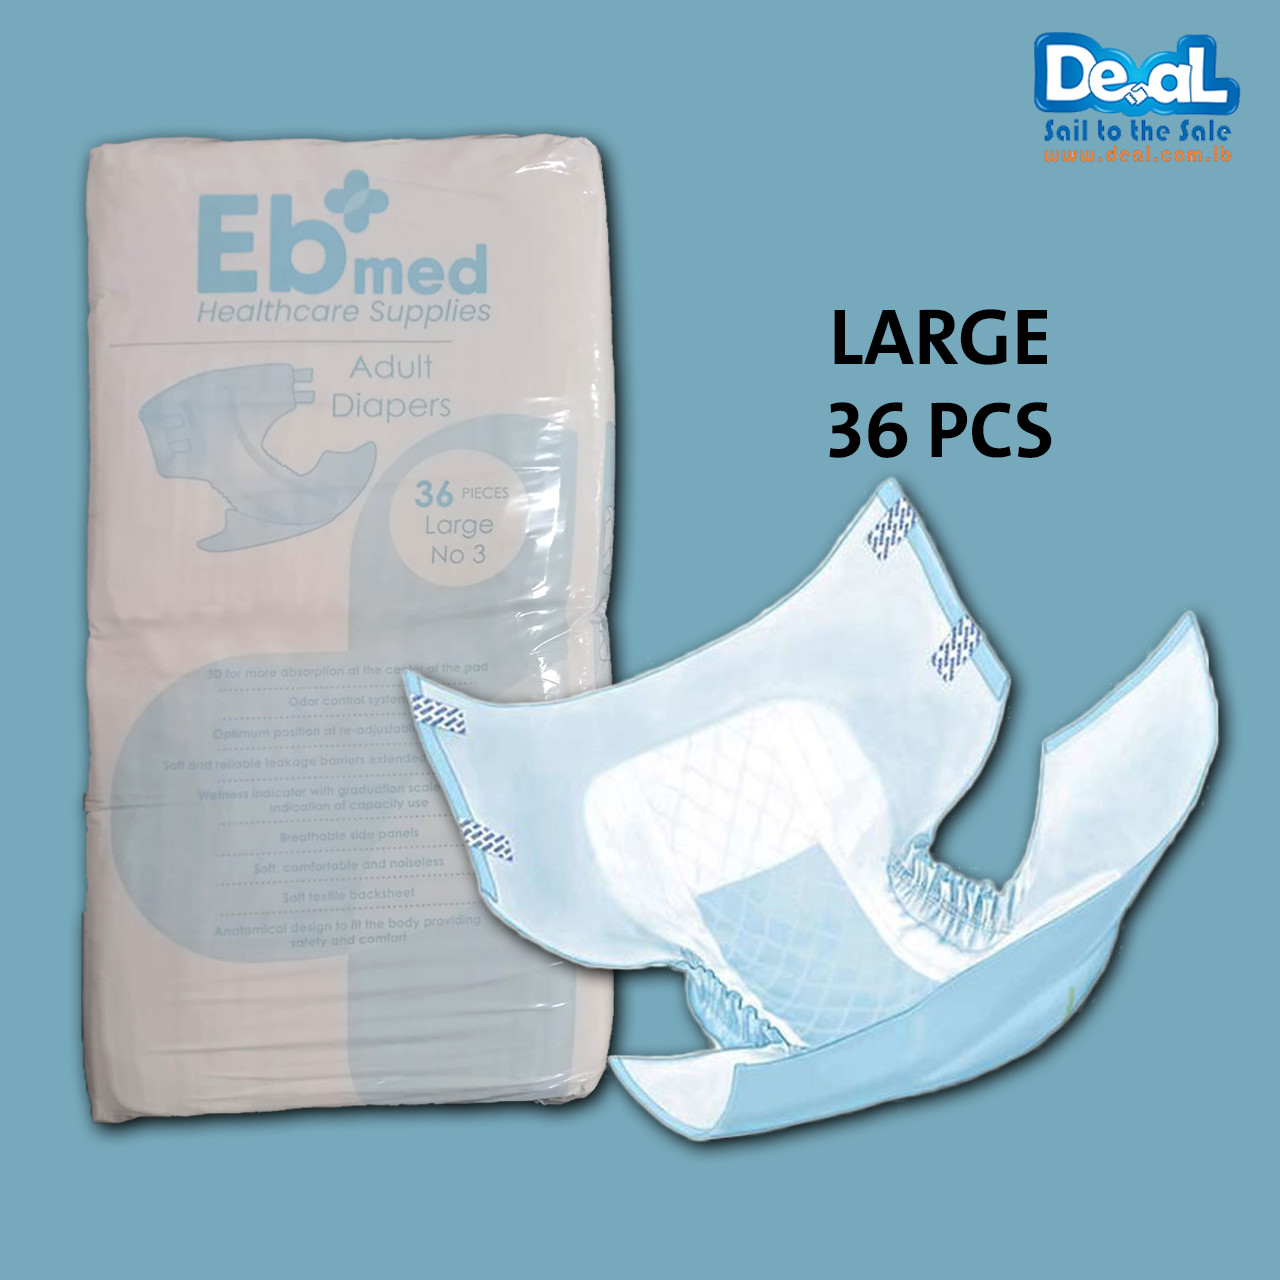 Eb med Adult Diapers 36Pieces | Large Size